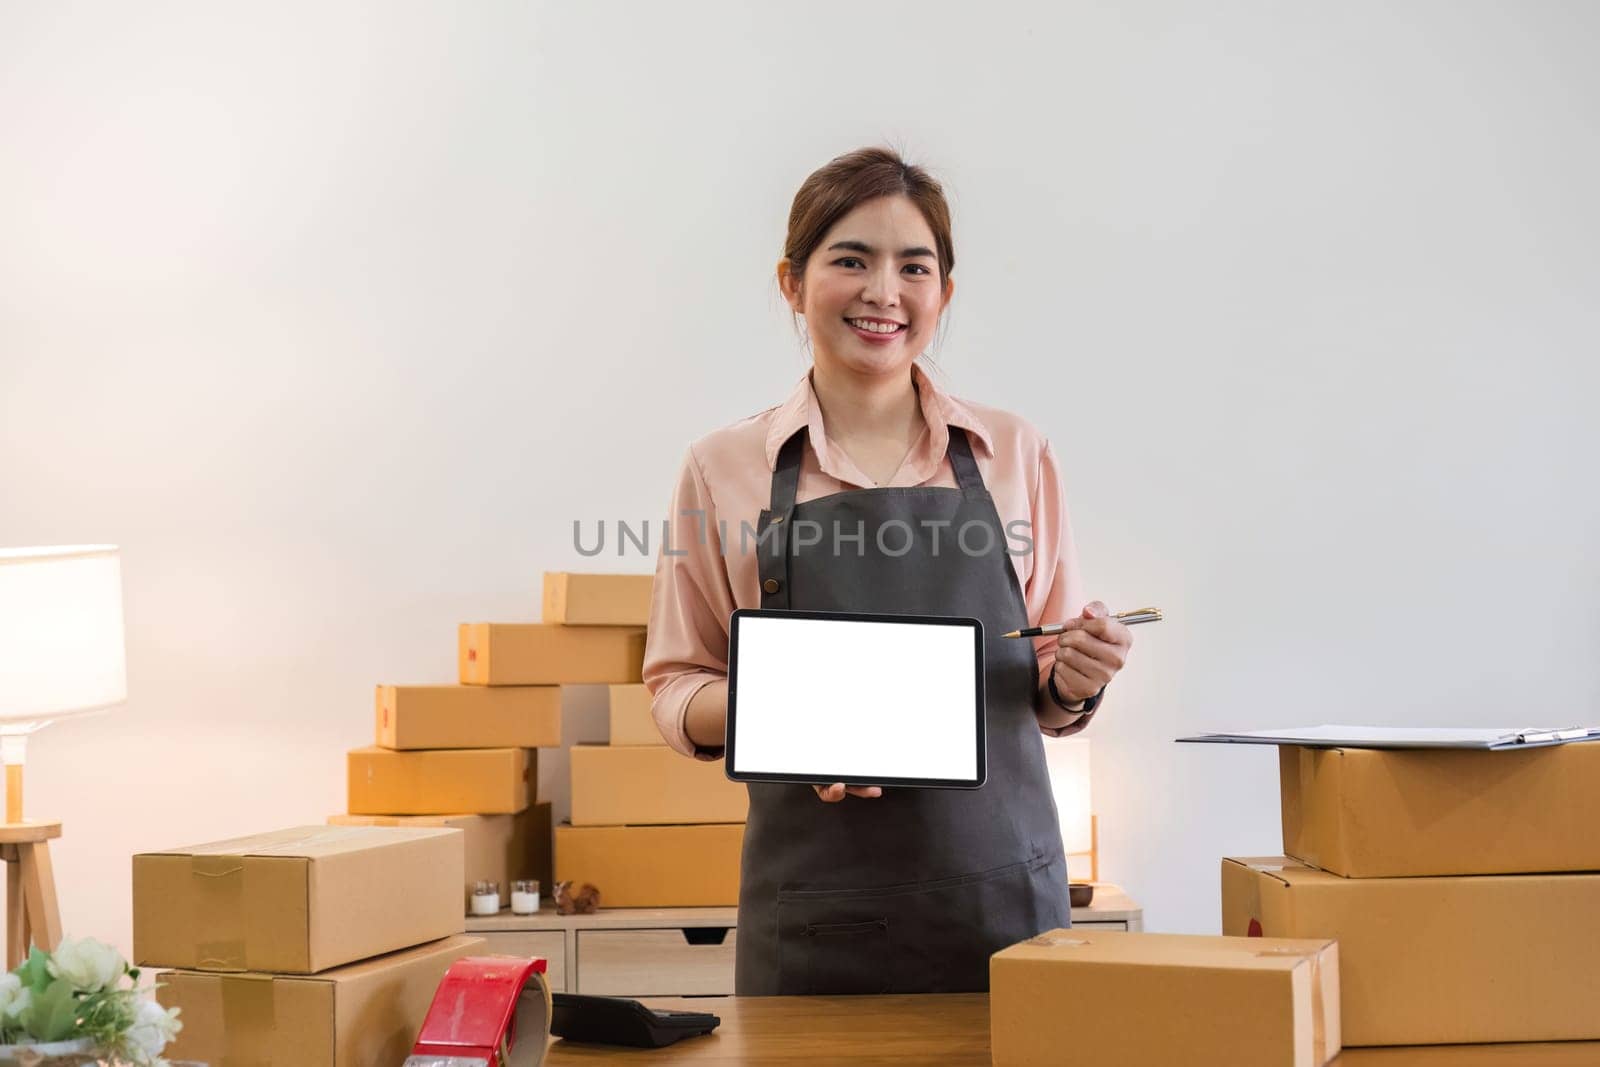 Happy Asian businesswoman holding laptop or tablet with blank screen standing in warehouse office with boxes of merchandise. Look at the camera and smile in a friendly way..